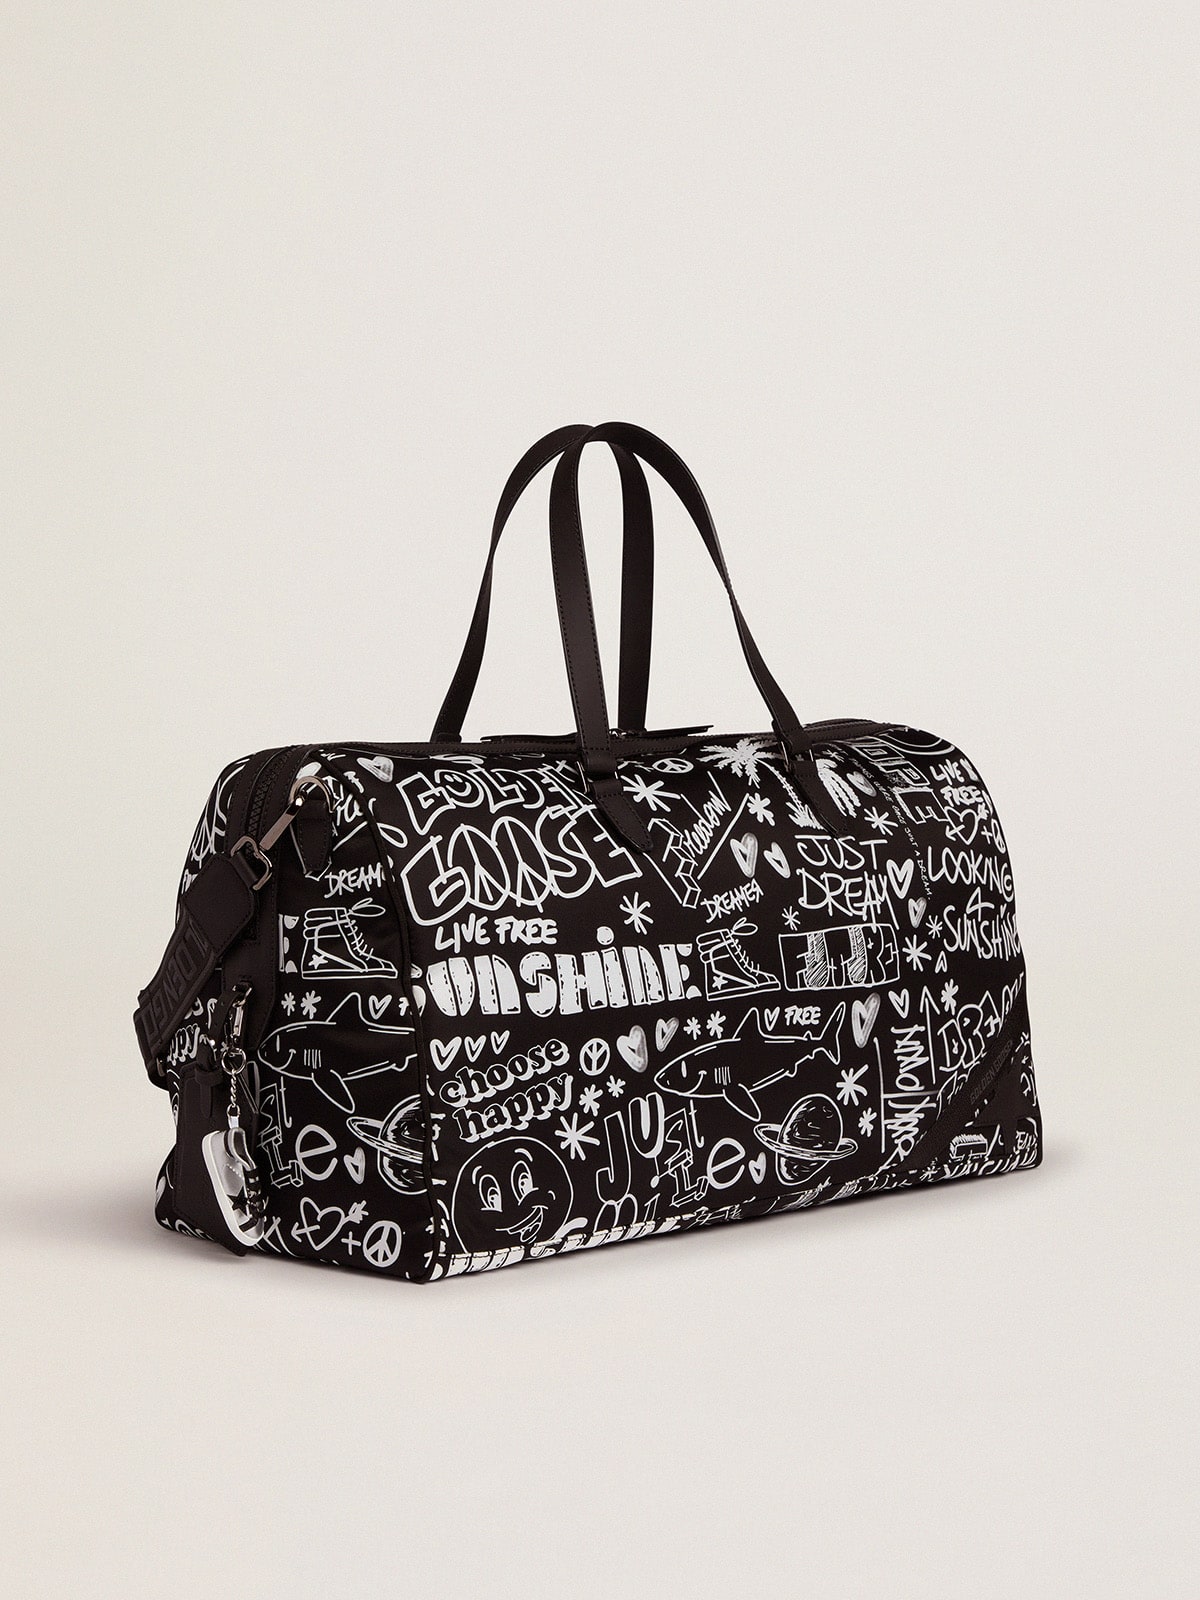 Golden Goose - Journey duffle bag in black nylon with contrasting white decorations in 